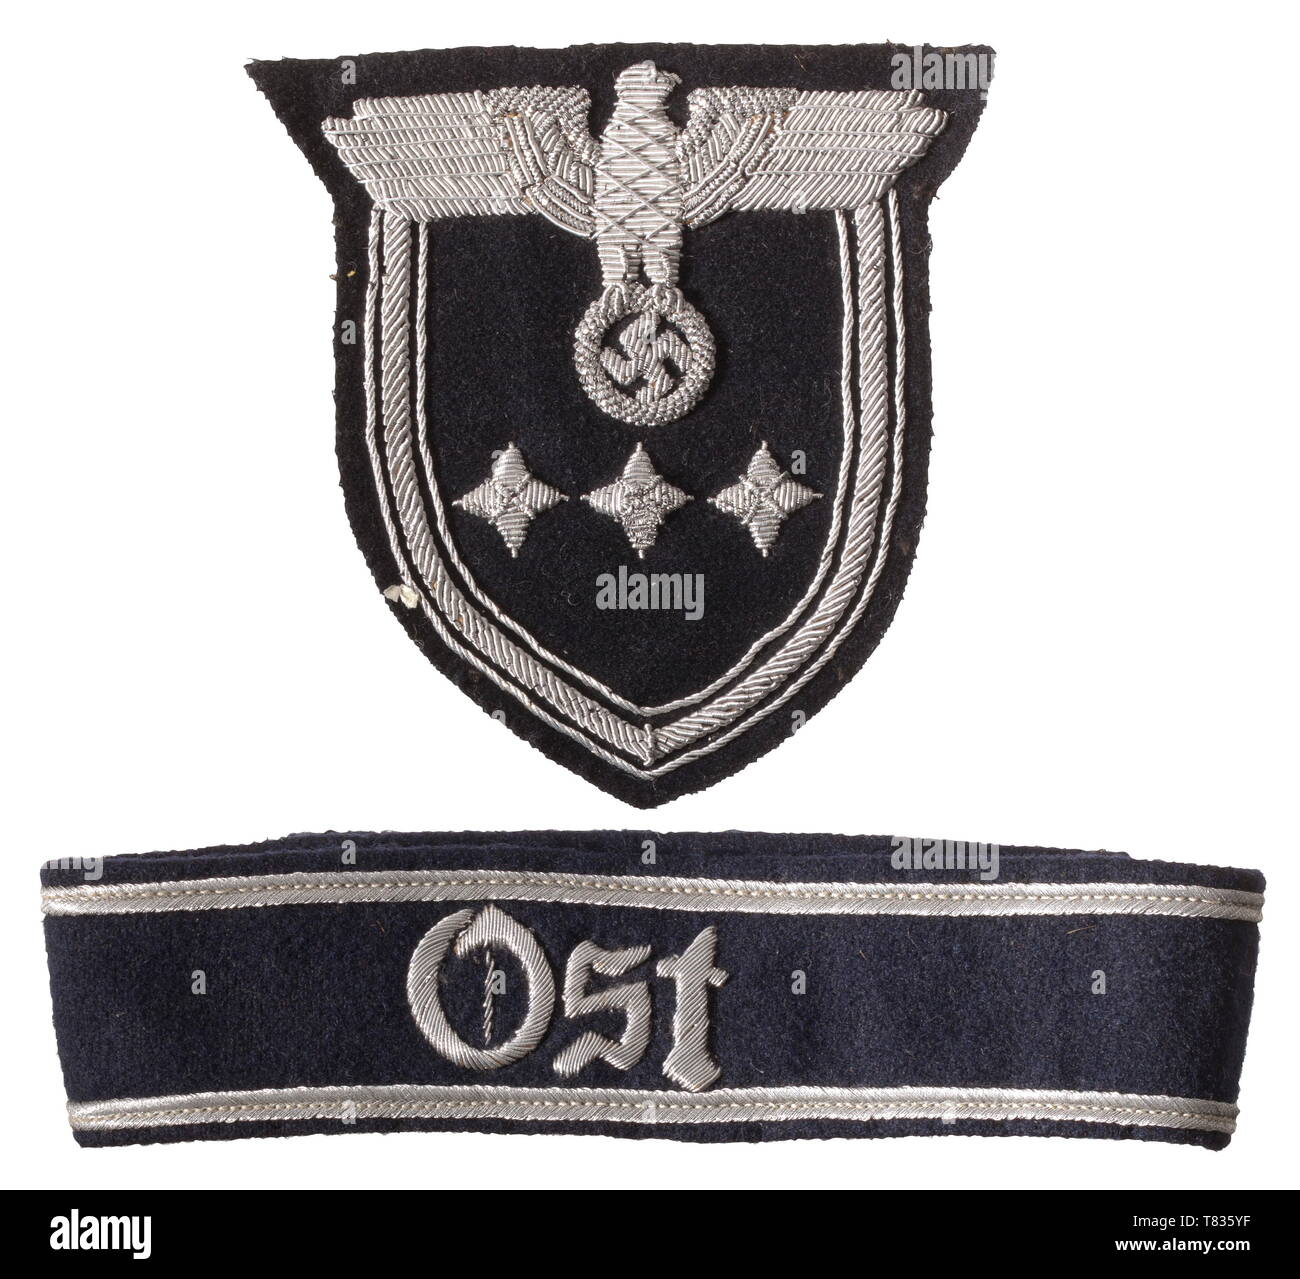 A cuff title 'Ost' for the General Gouvernement in Poland Included is a sleeve badge for members of the Diplomatic Corps (pay grade A2). The cuff title with hand-embroidered cyphers 'OST'. Dark blue base cloth with two silver weave borders, the reverse with linen reinforcement. Dimensions ca. 45 x 3.8 cm, with remnants of threads due to stitching. The sleeve badge made as before, with a rightward-looking hand-embroidered national eagle, the reverse with beige coloured paper covering. Dimensions ca. 10 x 10 cm. Cf. 'In the Service of the Reich', J, Additional-Rights-Clearance-Info-Not-Available Stock Photo